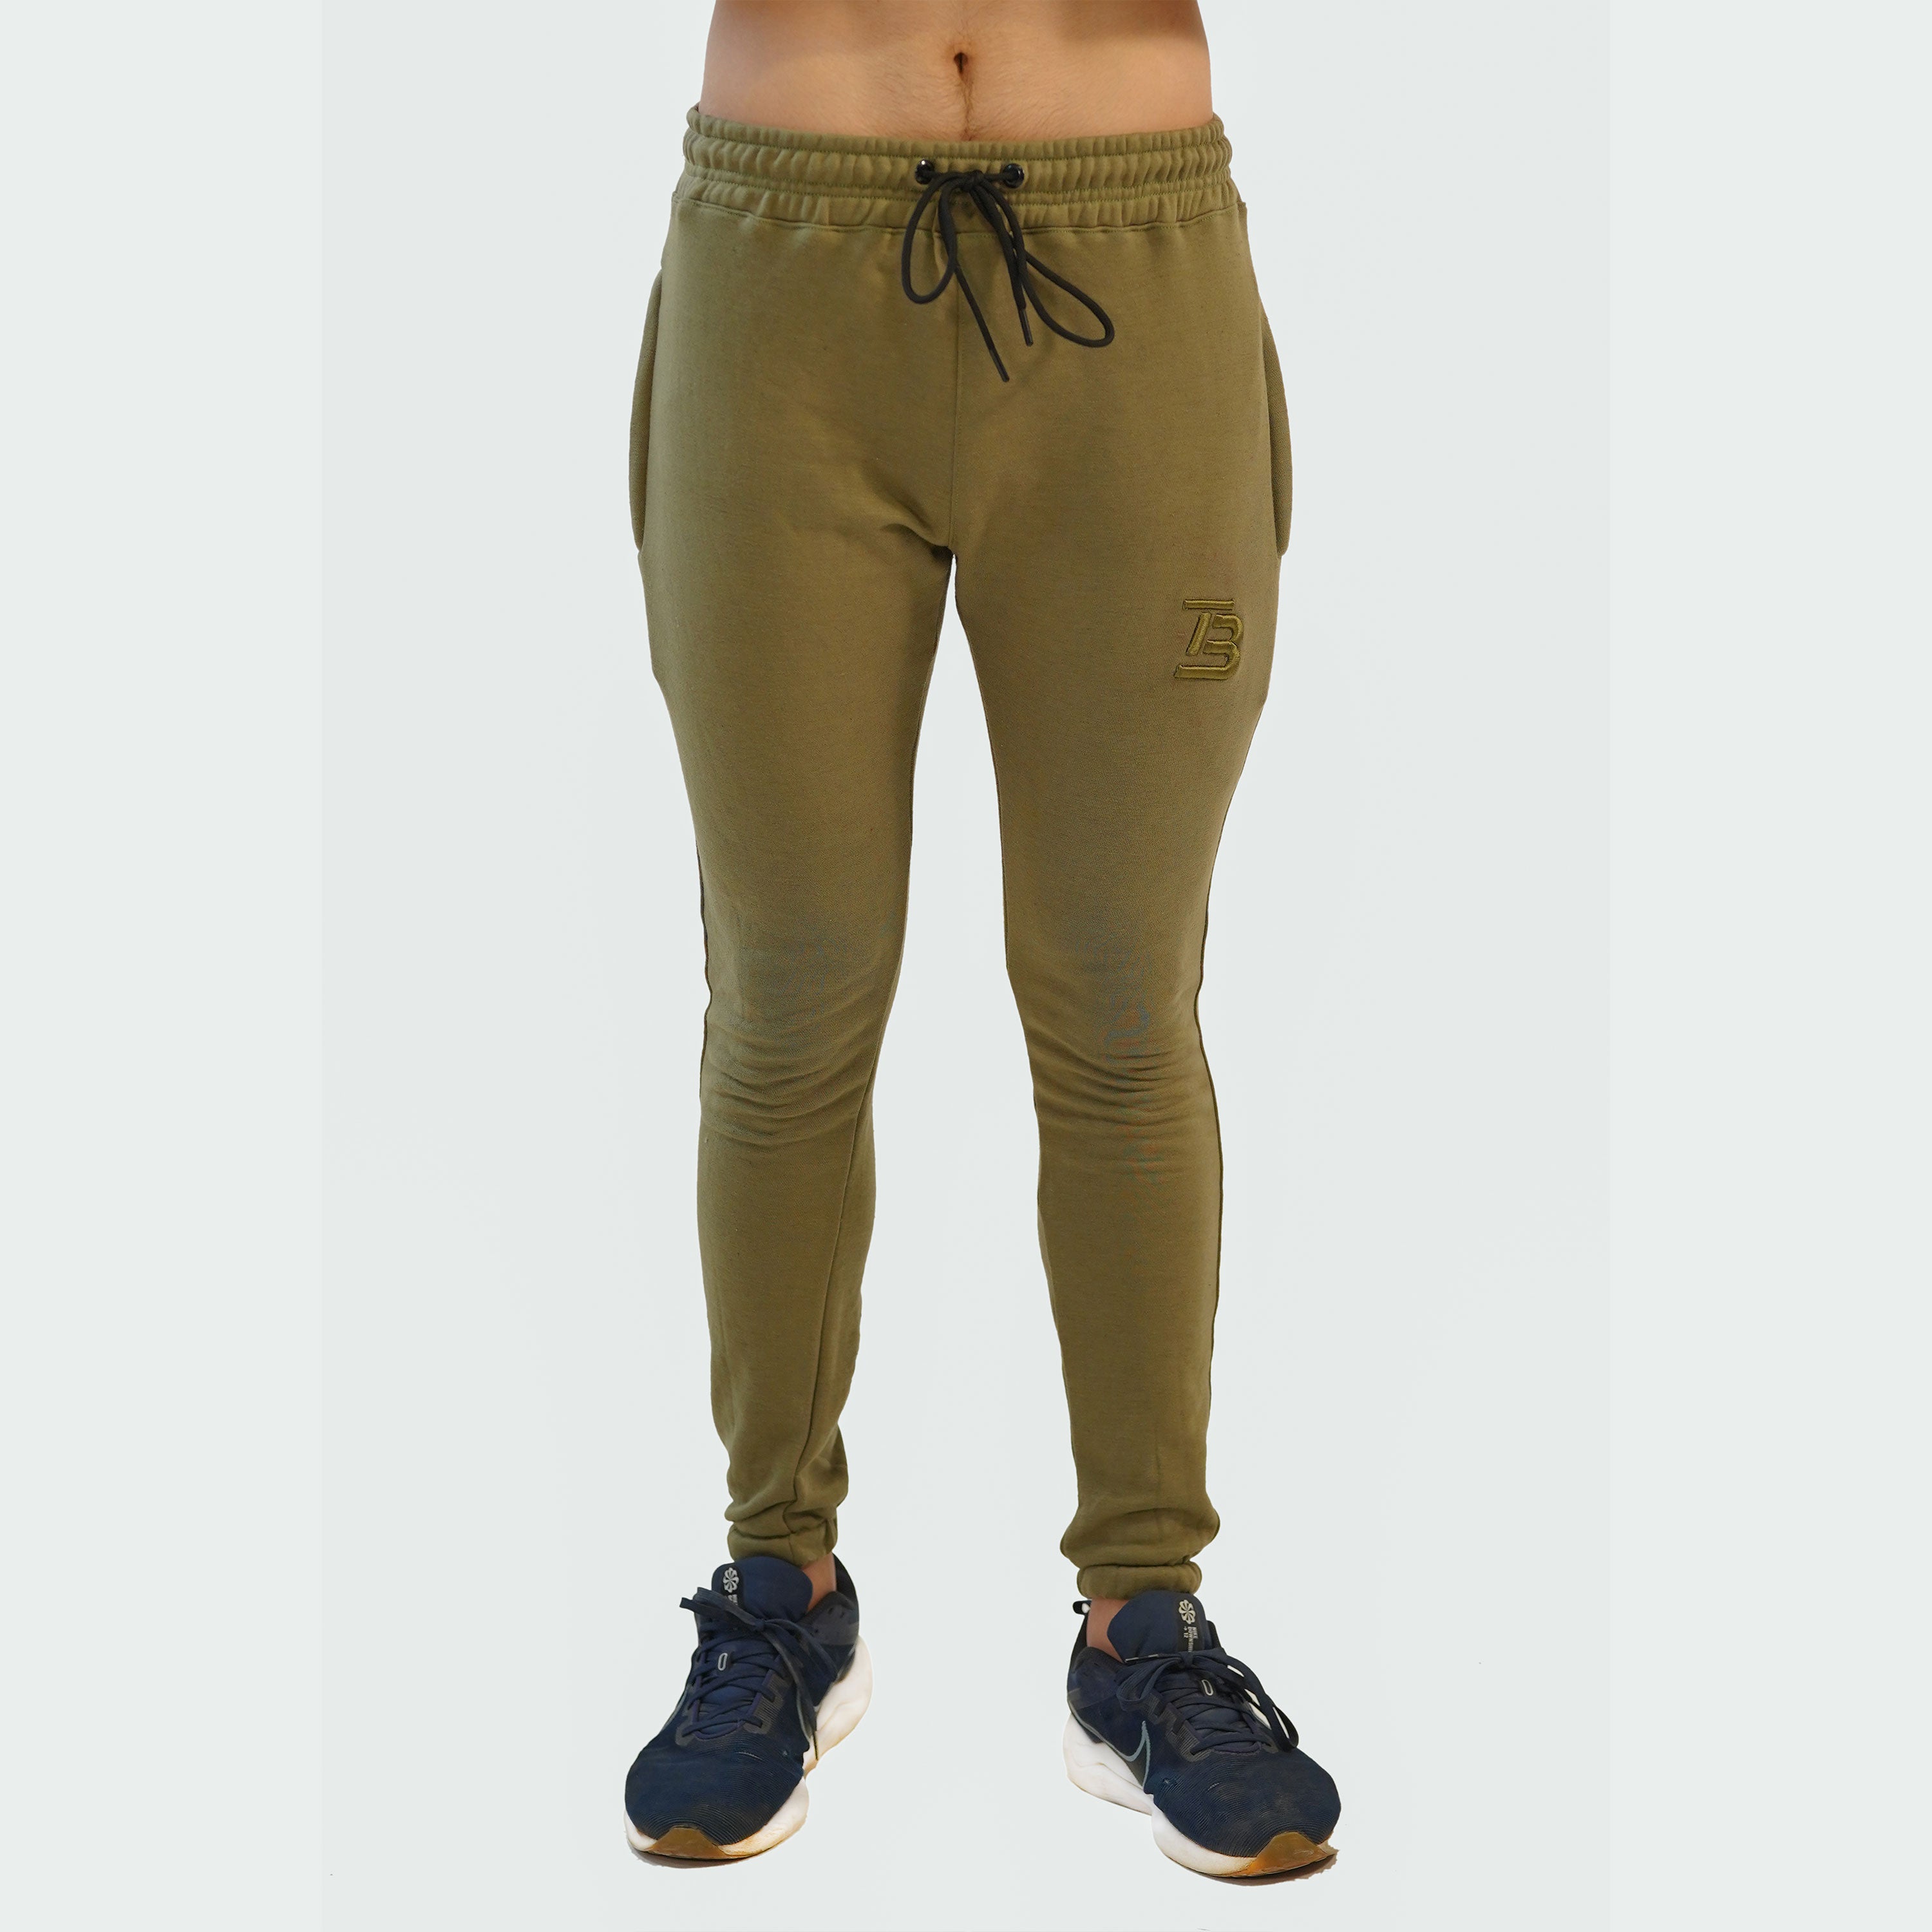 Comfy Causal Trouser - Olive Green